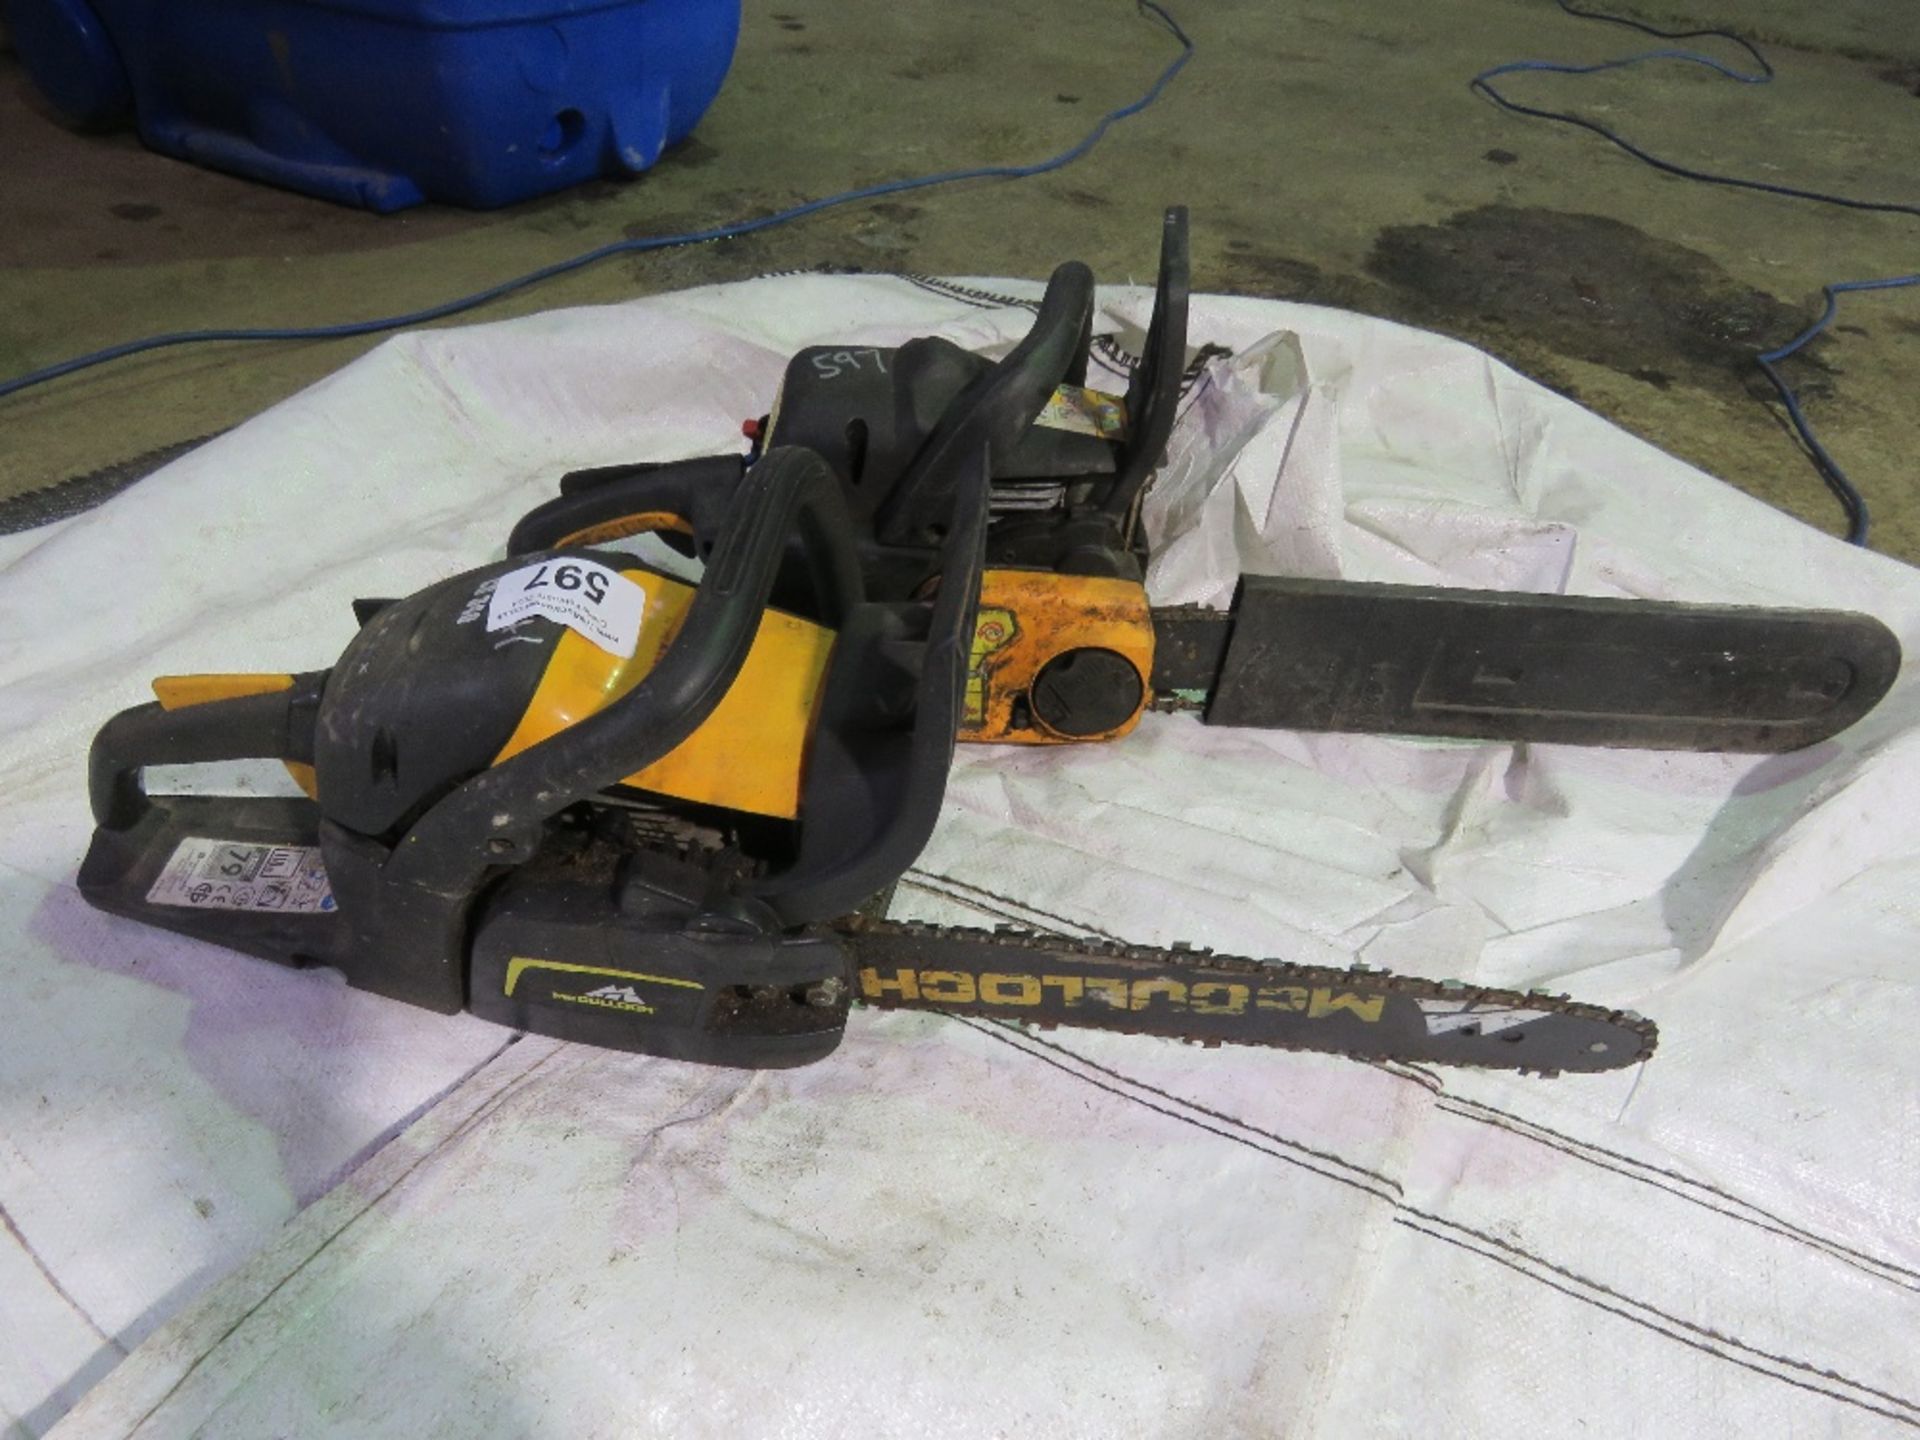 2 X McCULLOCH PETROL CHAINSAWS. - Image 2 of 3